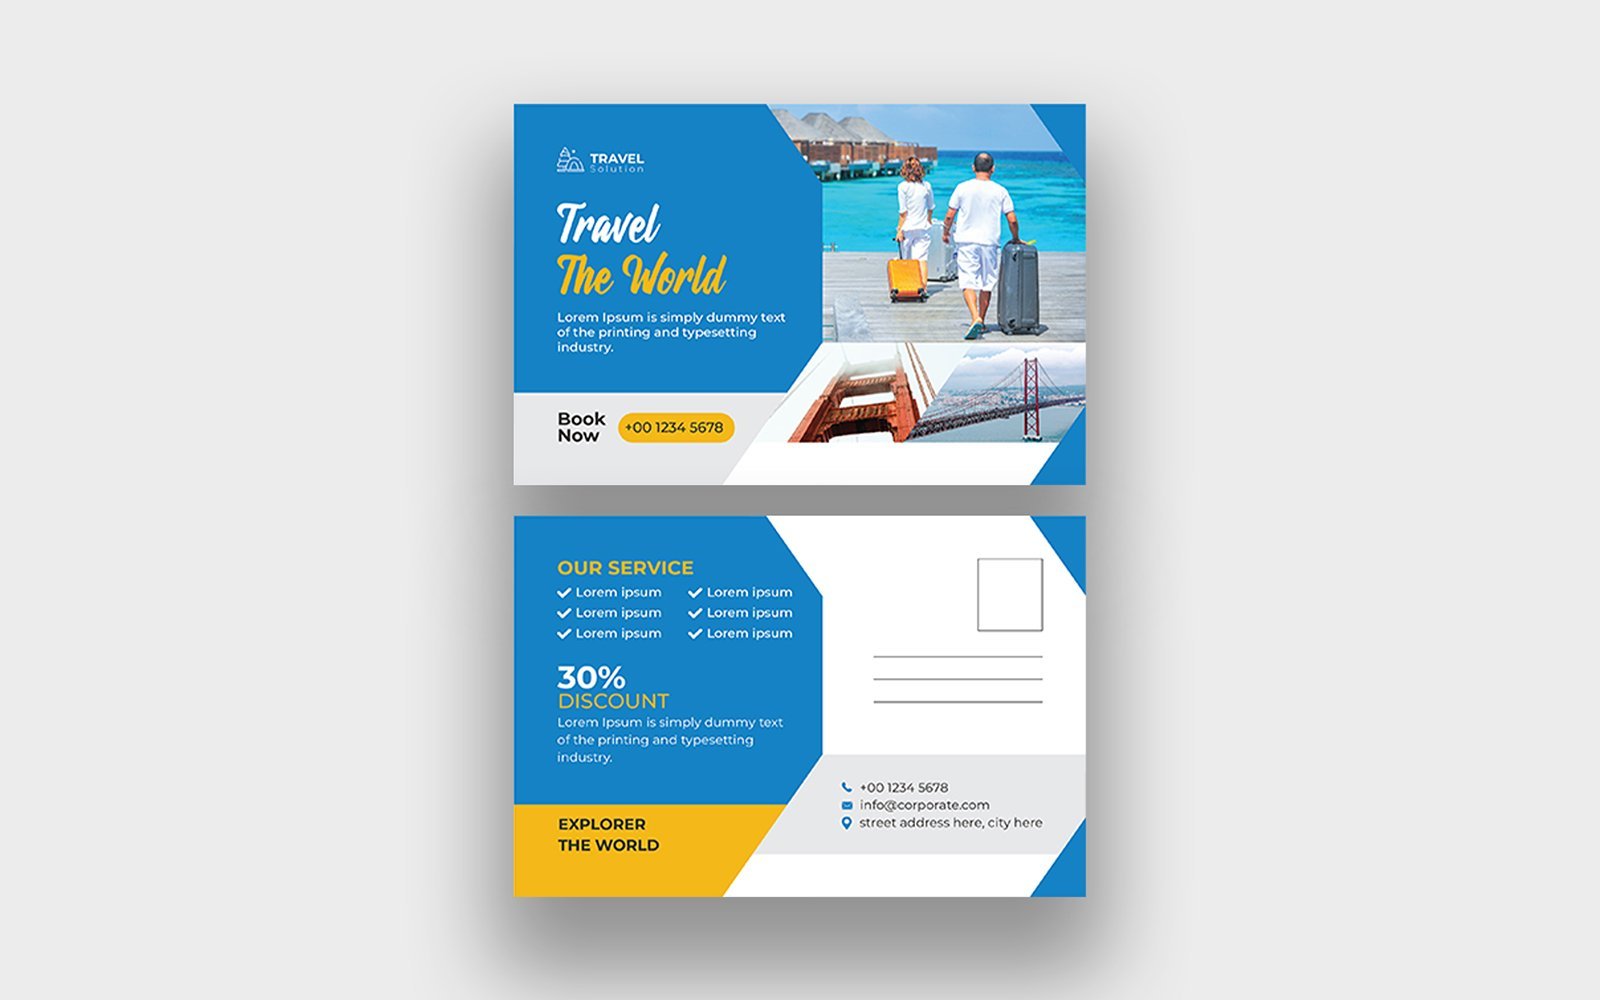 Template #298348 Travel Travel Webdesign Template - Logo template Preview